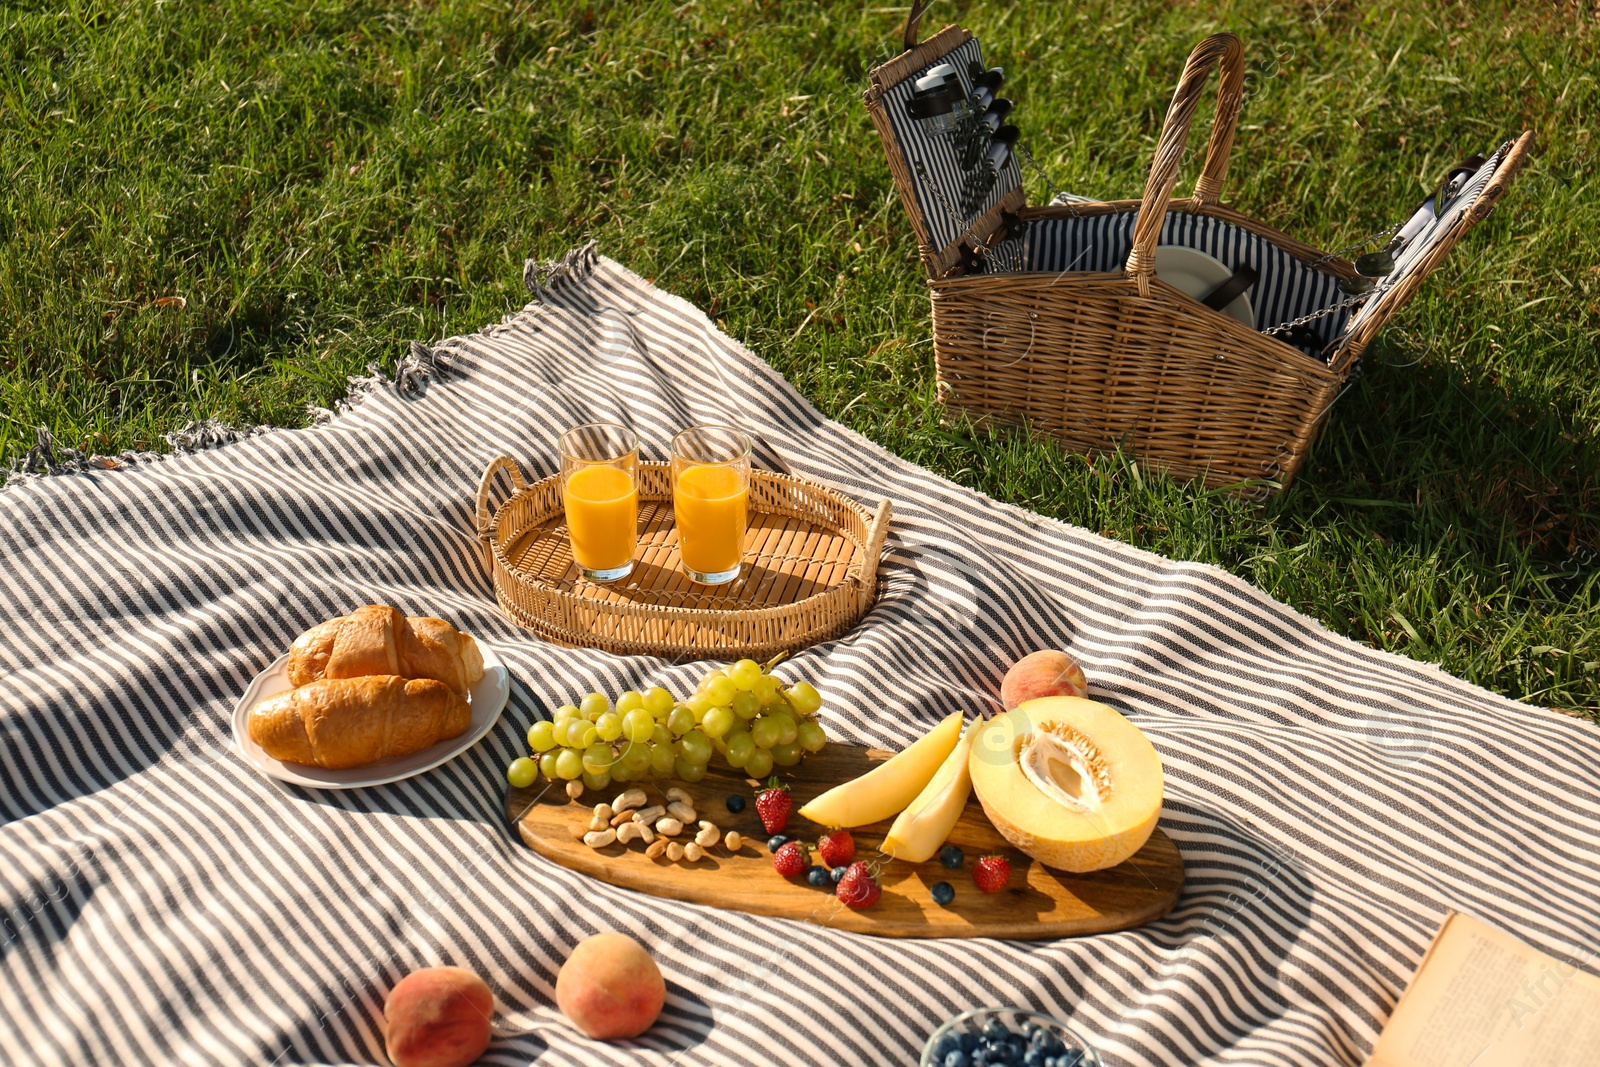 Photo of Picnic blanket with delicious food and juice on green grass outdoors